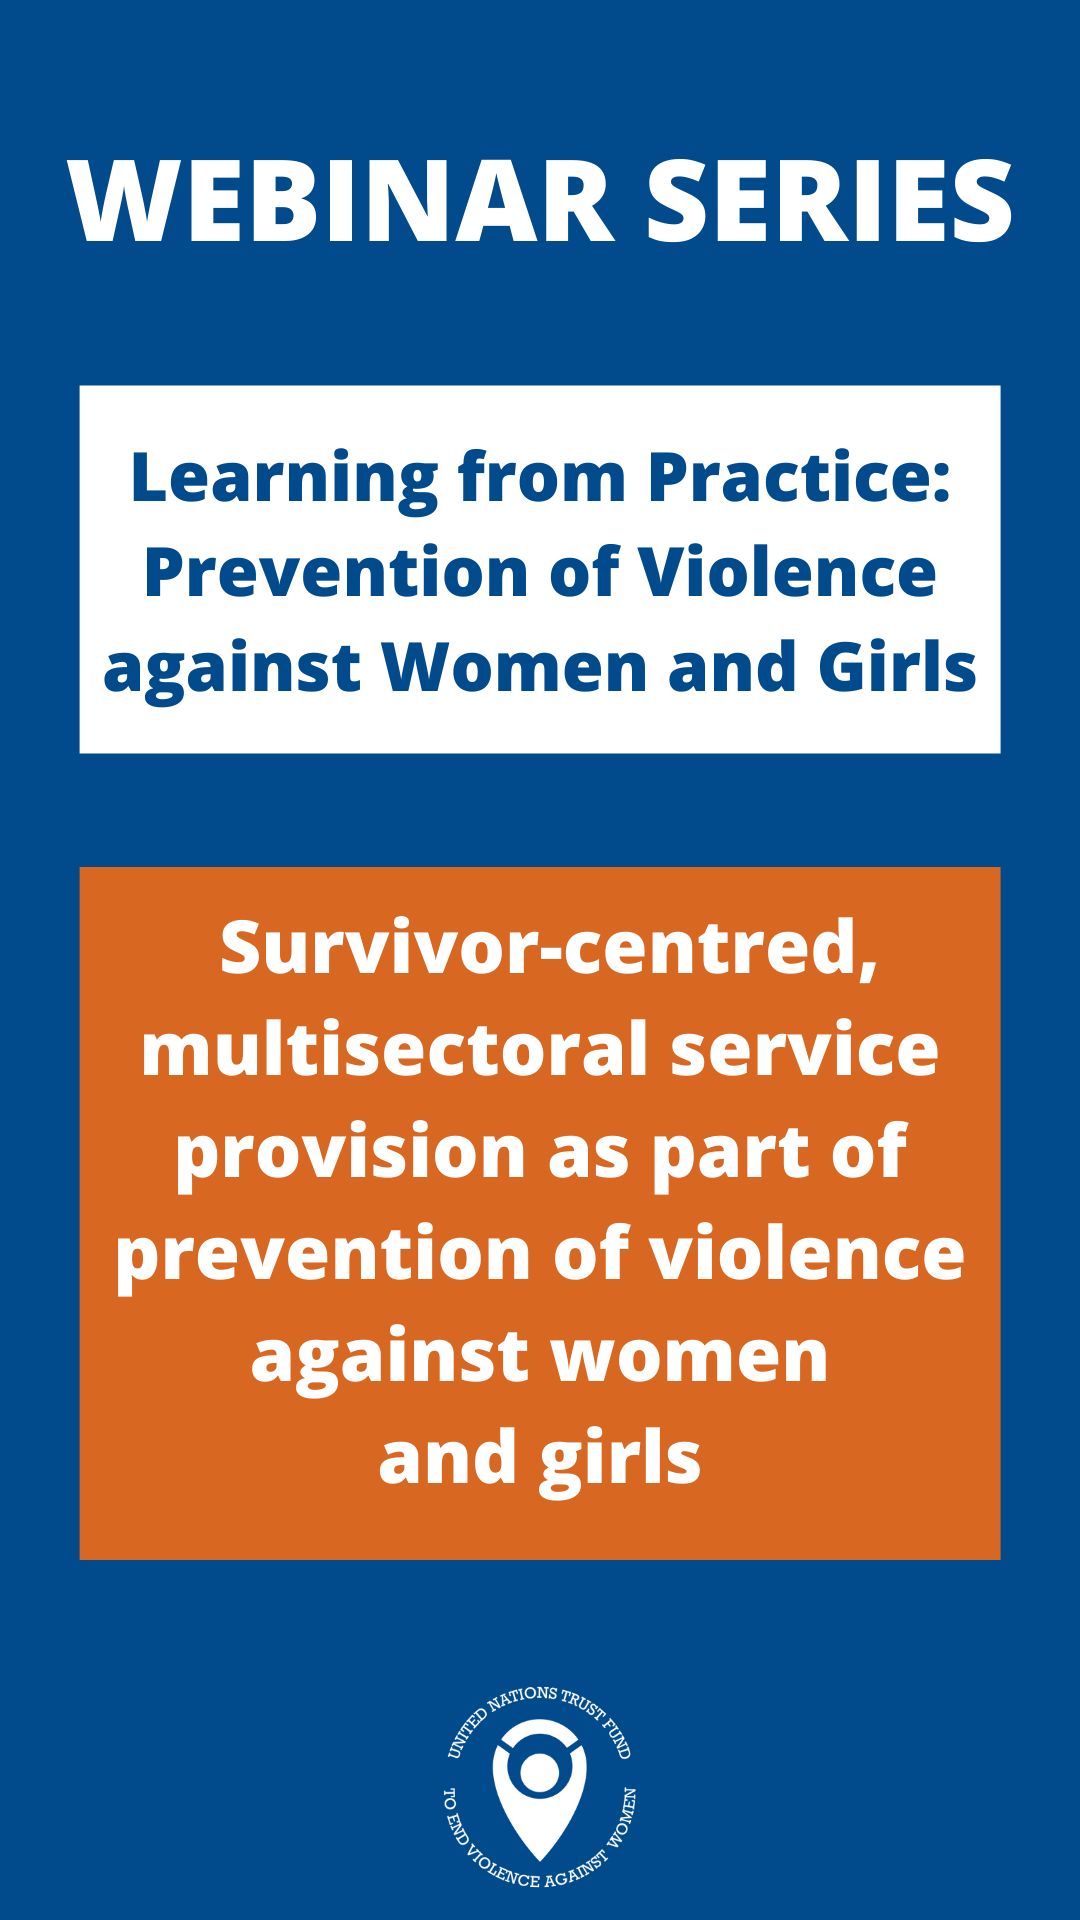 learning from practice: survivor centred and multi sectoral services